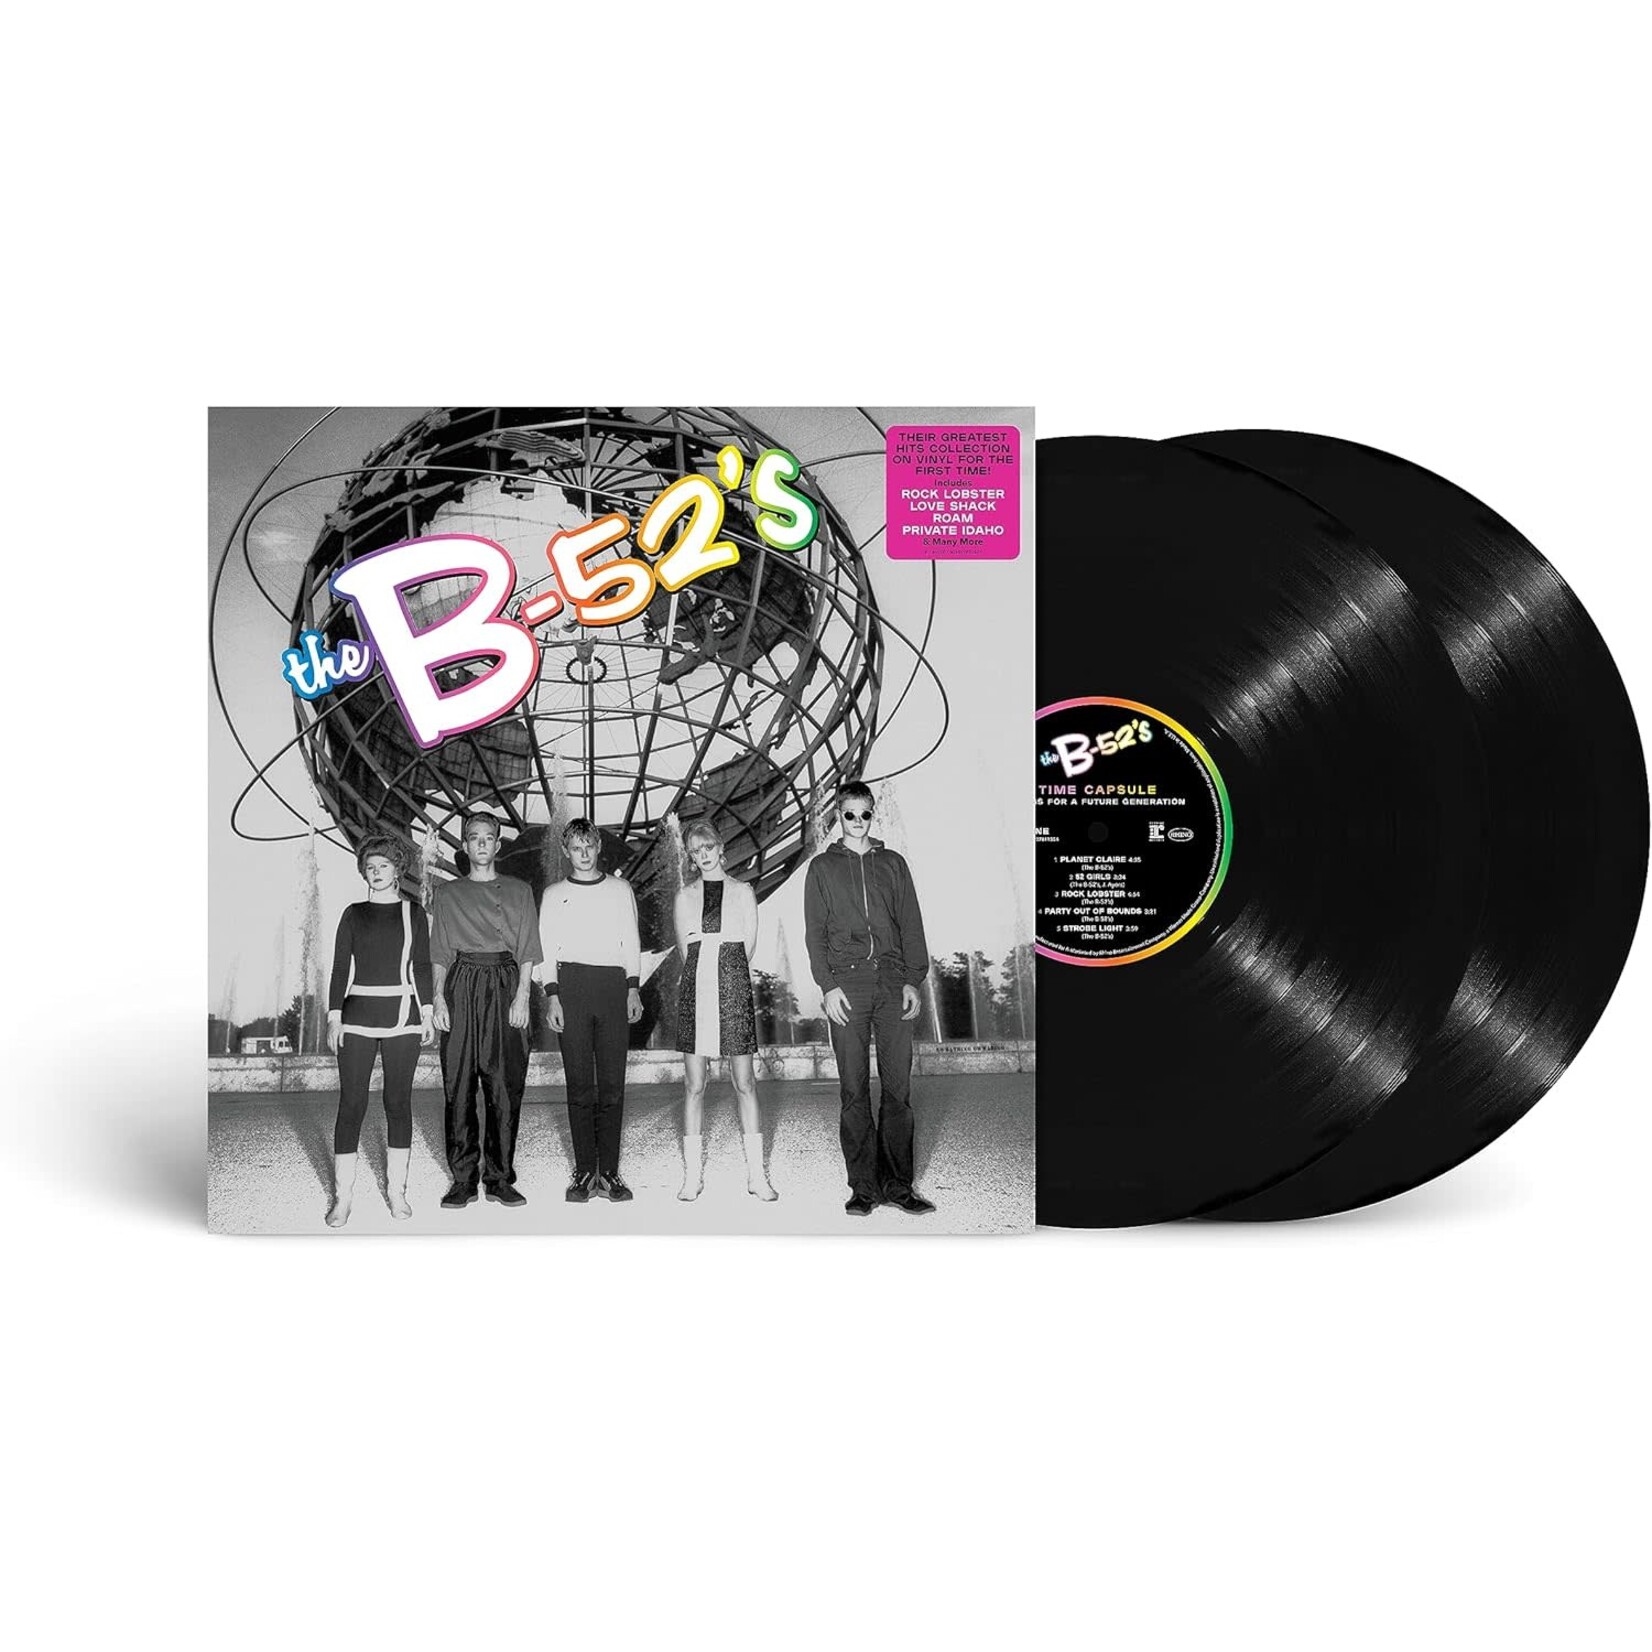 B-52's - Time Capsule: Songs For A Future Generation [2LP]